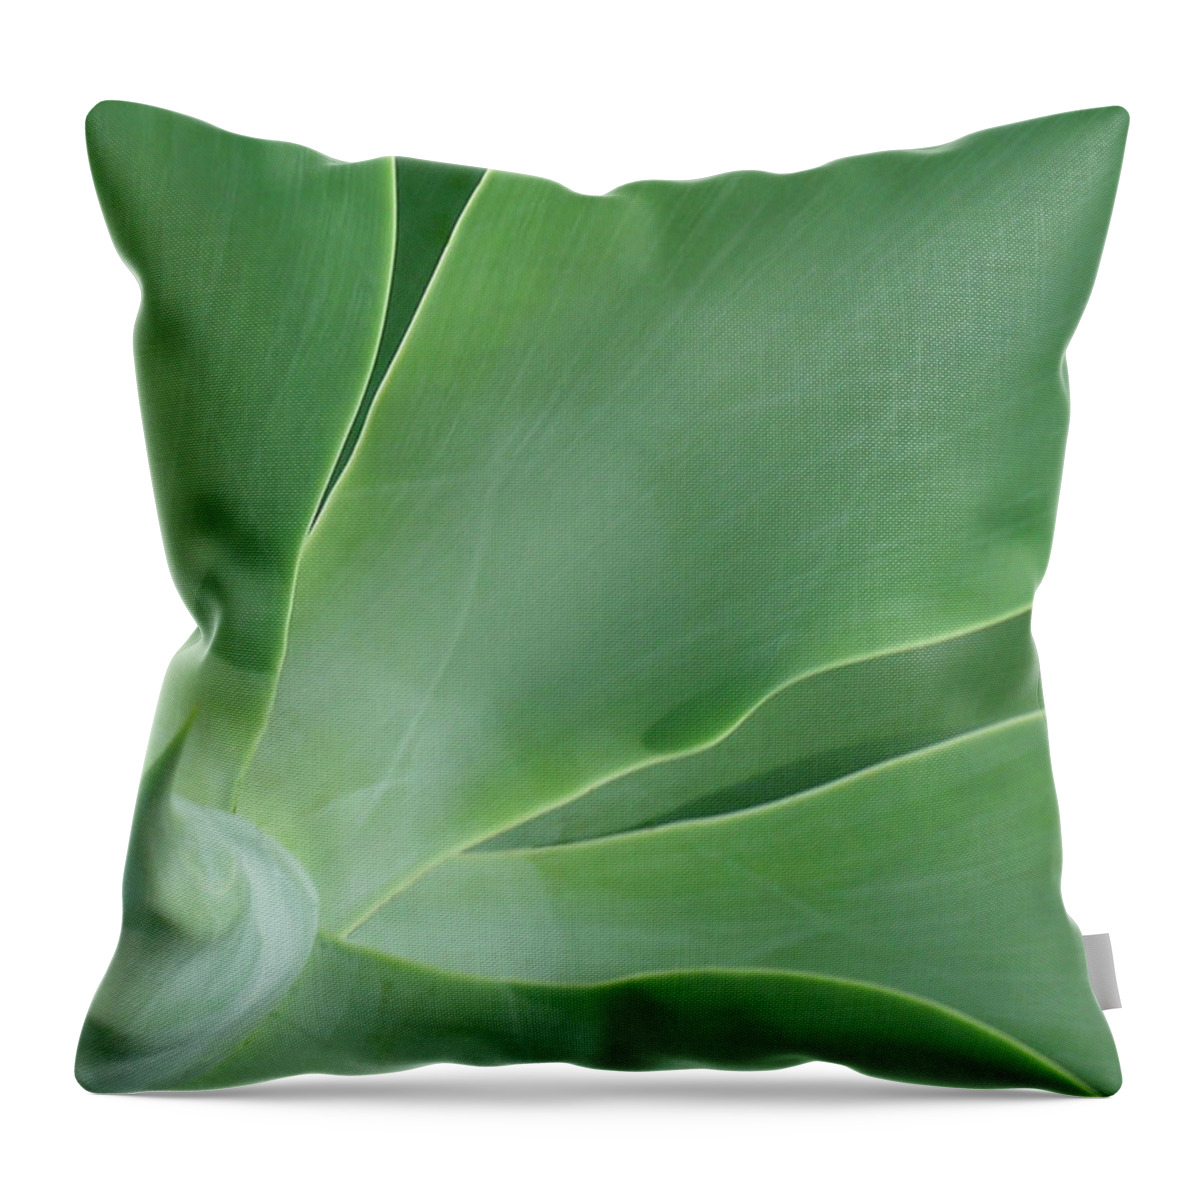 Agave Throw Pillow featuring the photograph Agave by James Temple